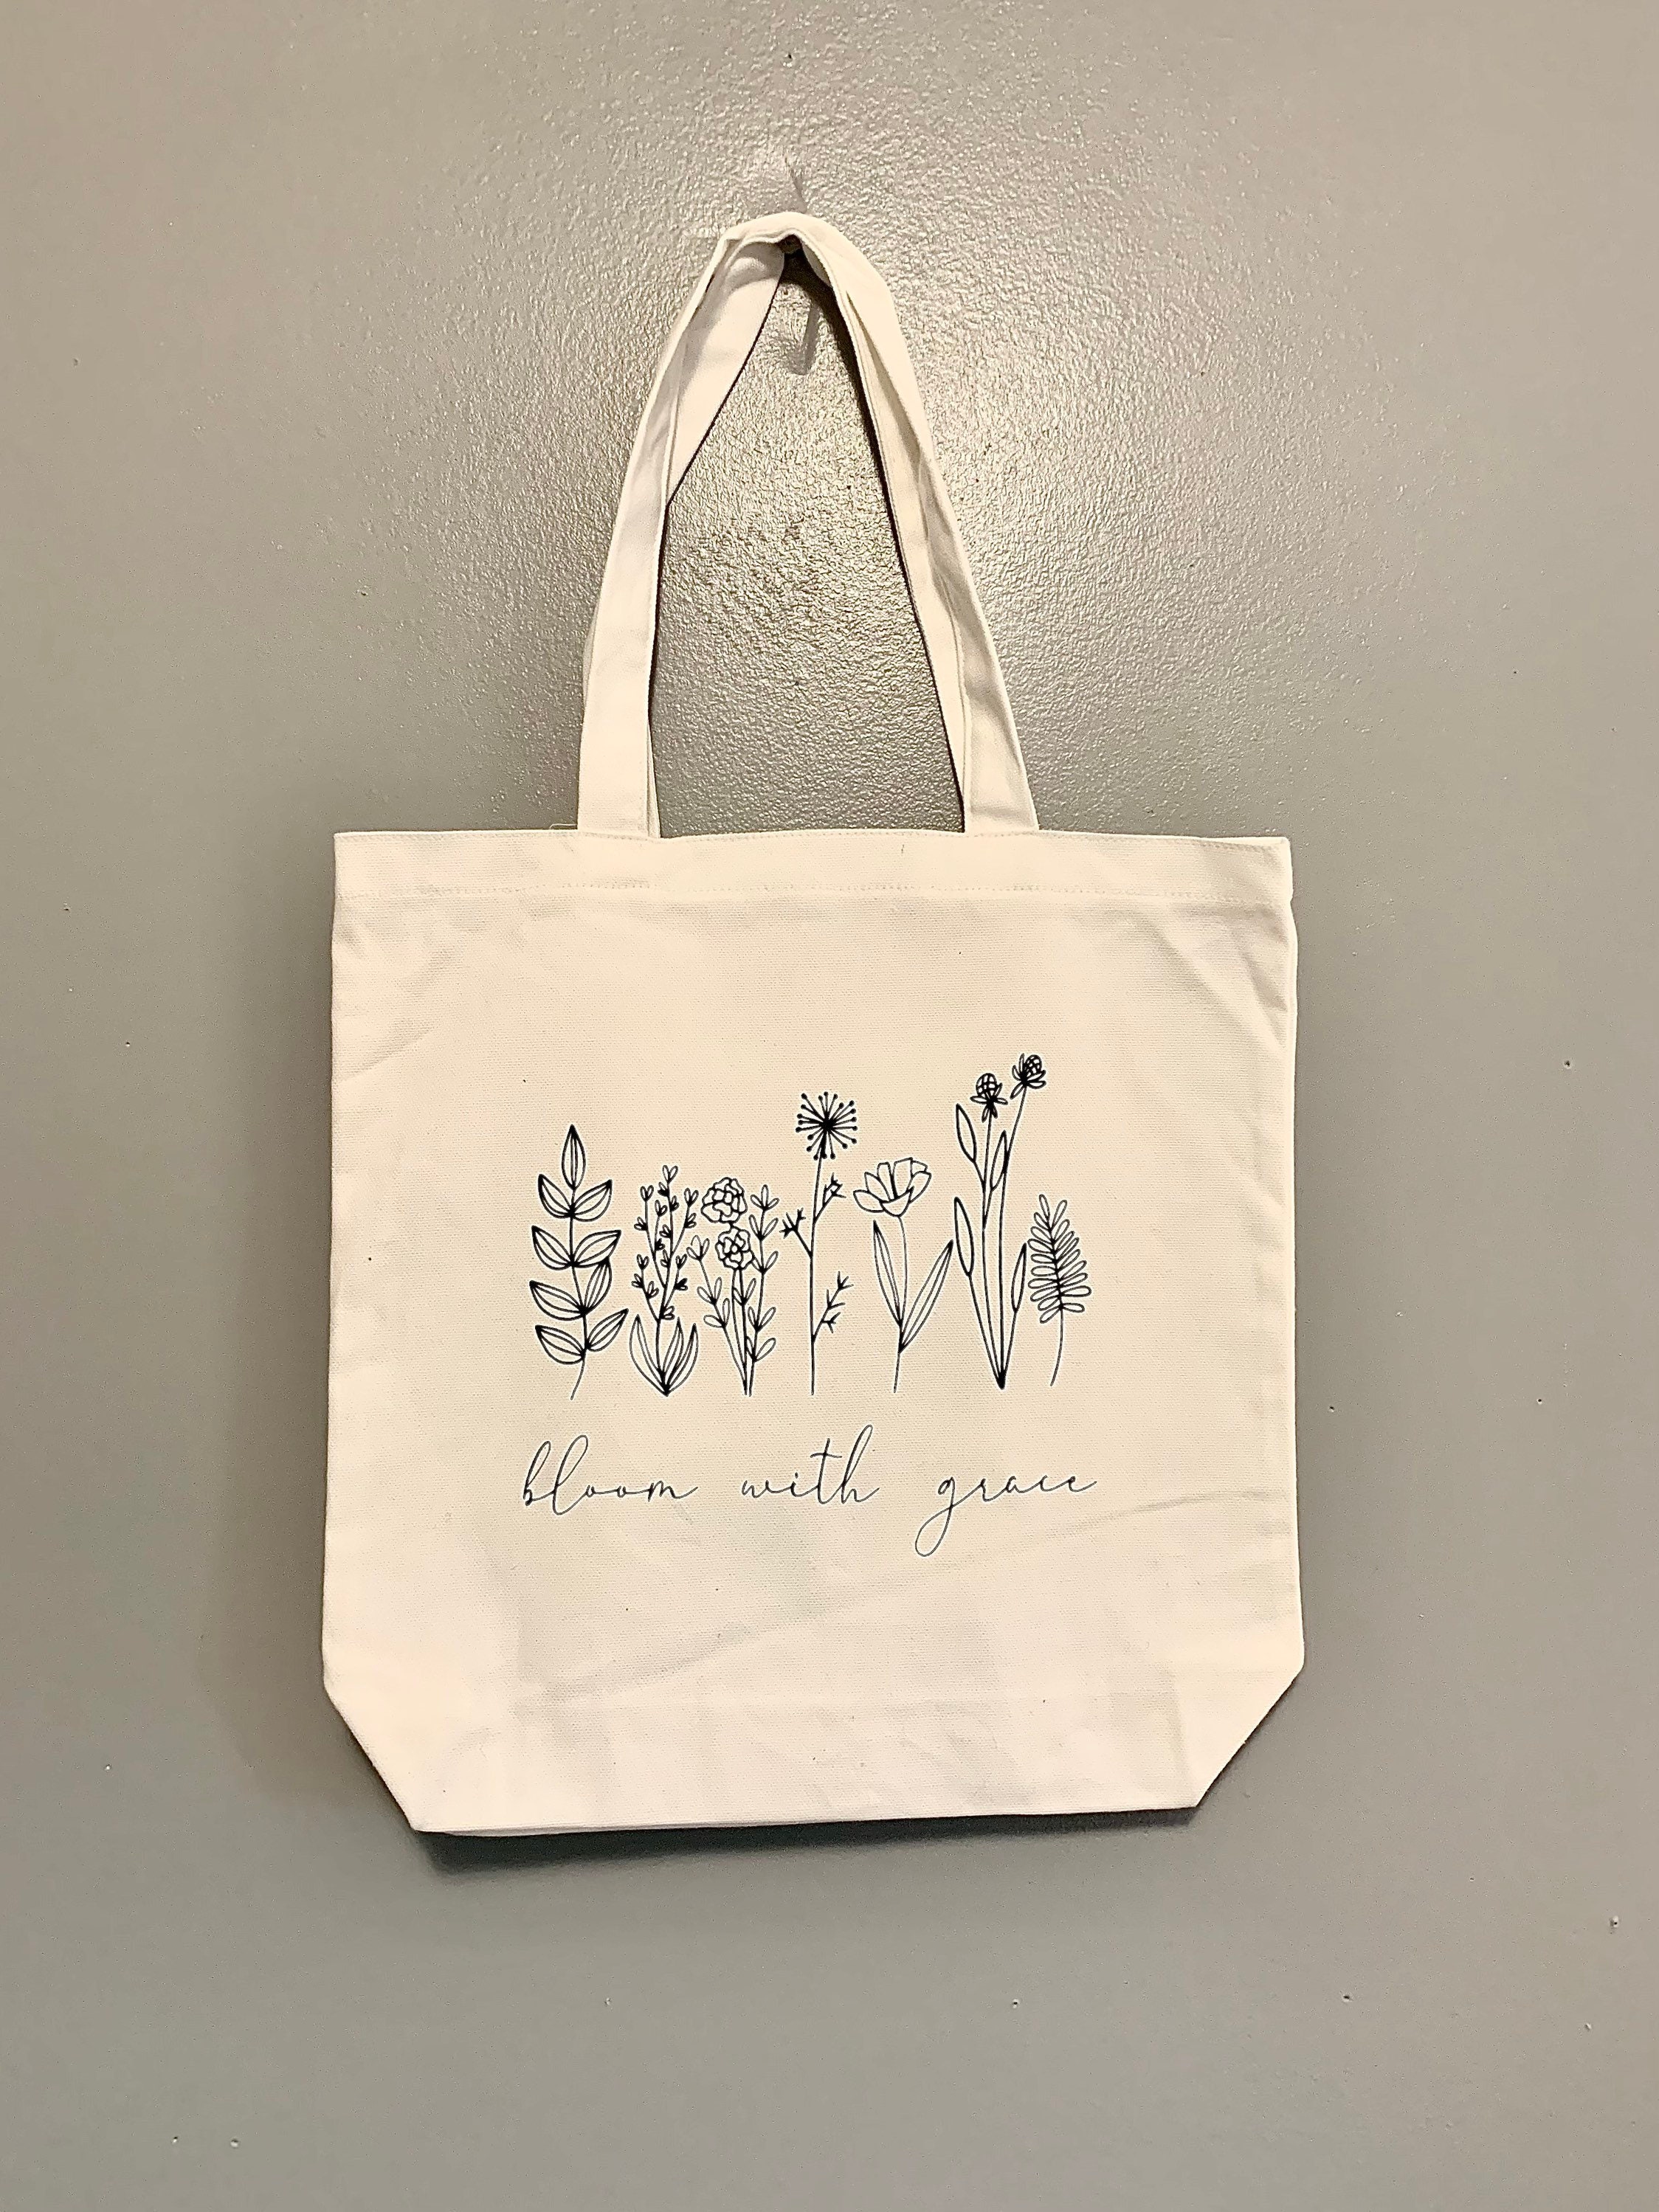 Bloom with grace reusable canvas tote bag reusable grocery | Etsy